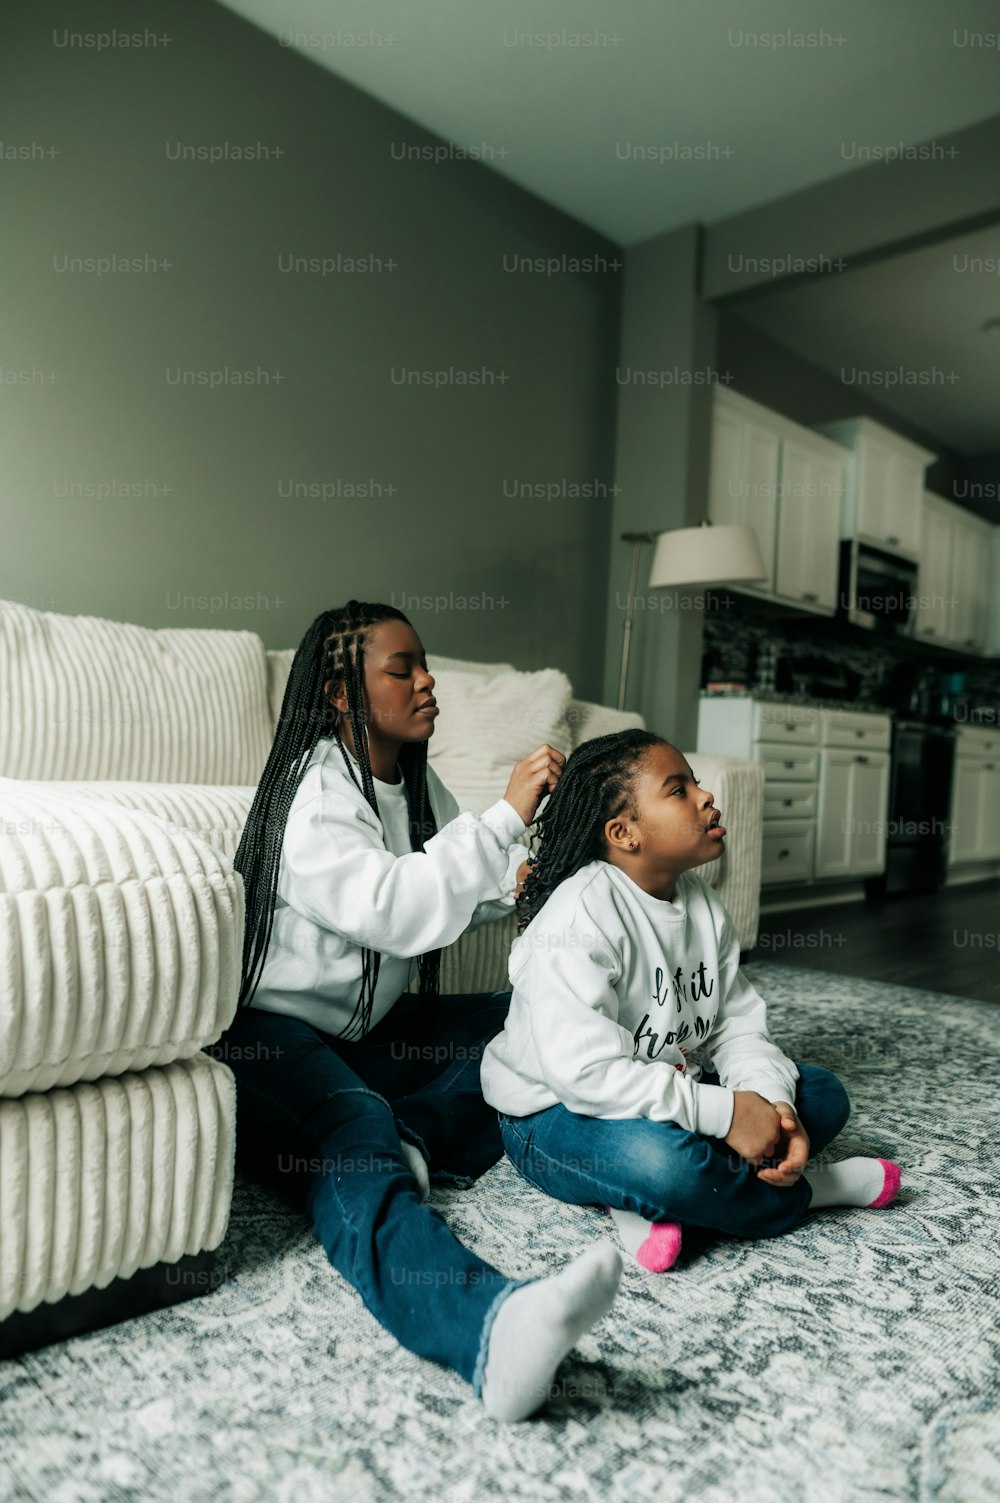 a woman combing a child's hair in a living room